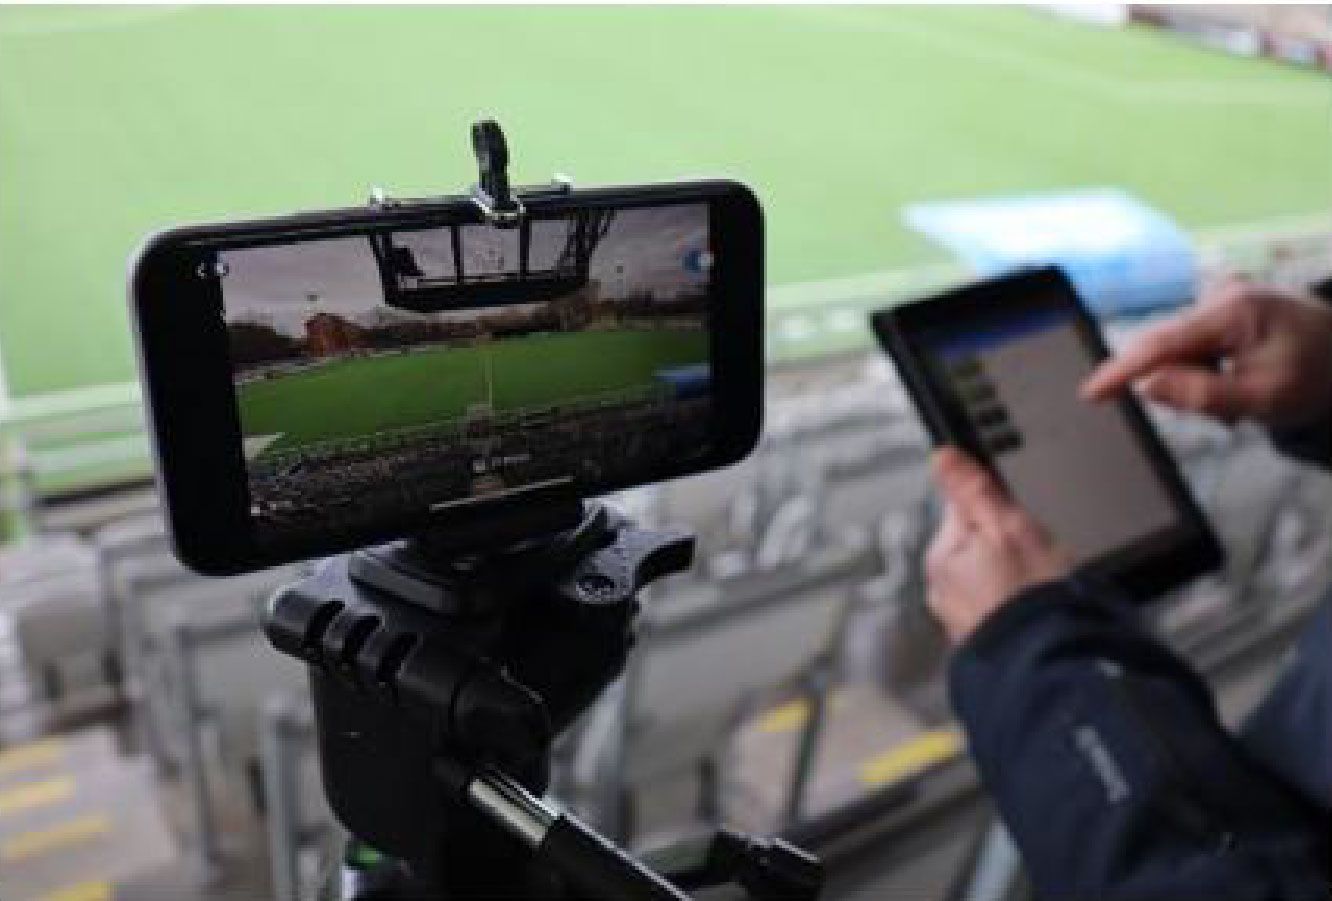 trial Break apart Brewery Mobile Virtual Panorama: Smartphone-enabled sports video capture & analysis  - Spiideo